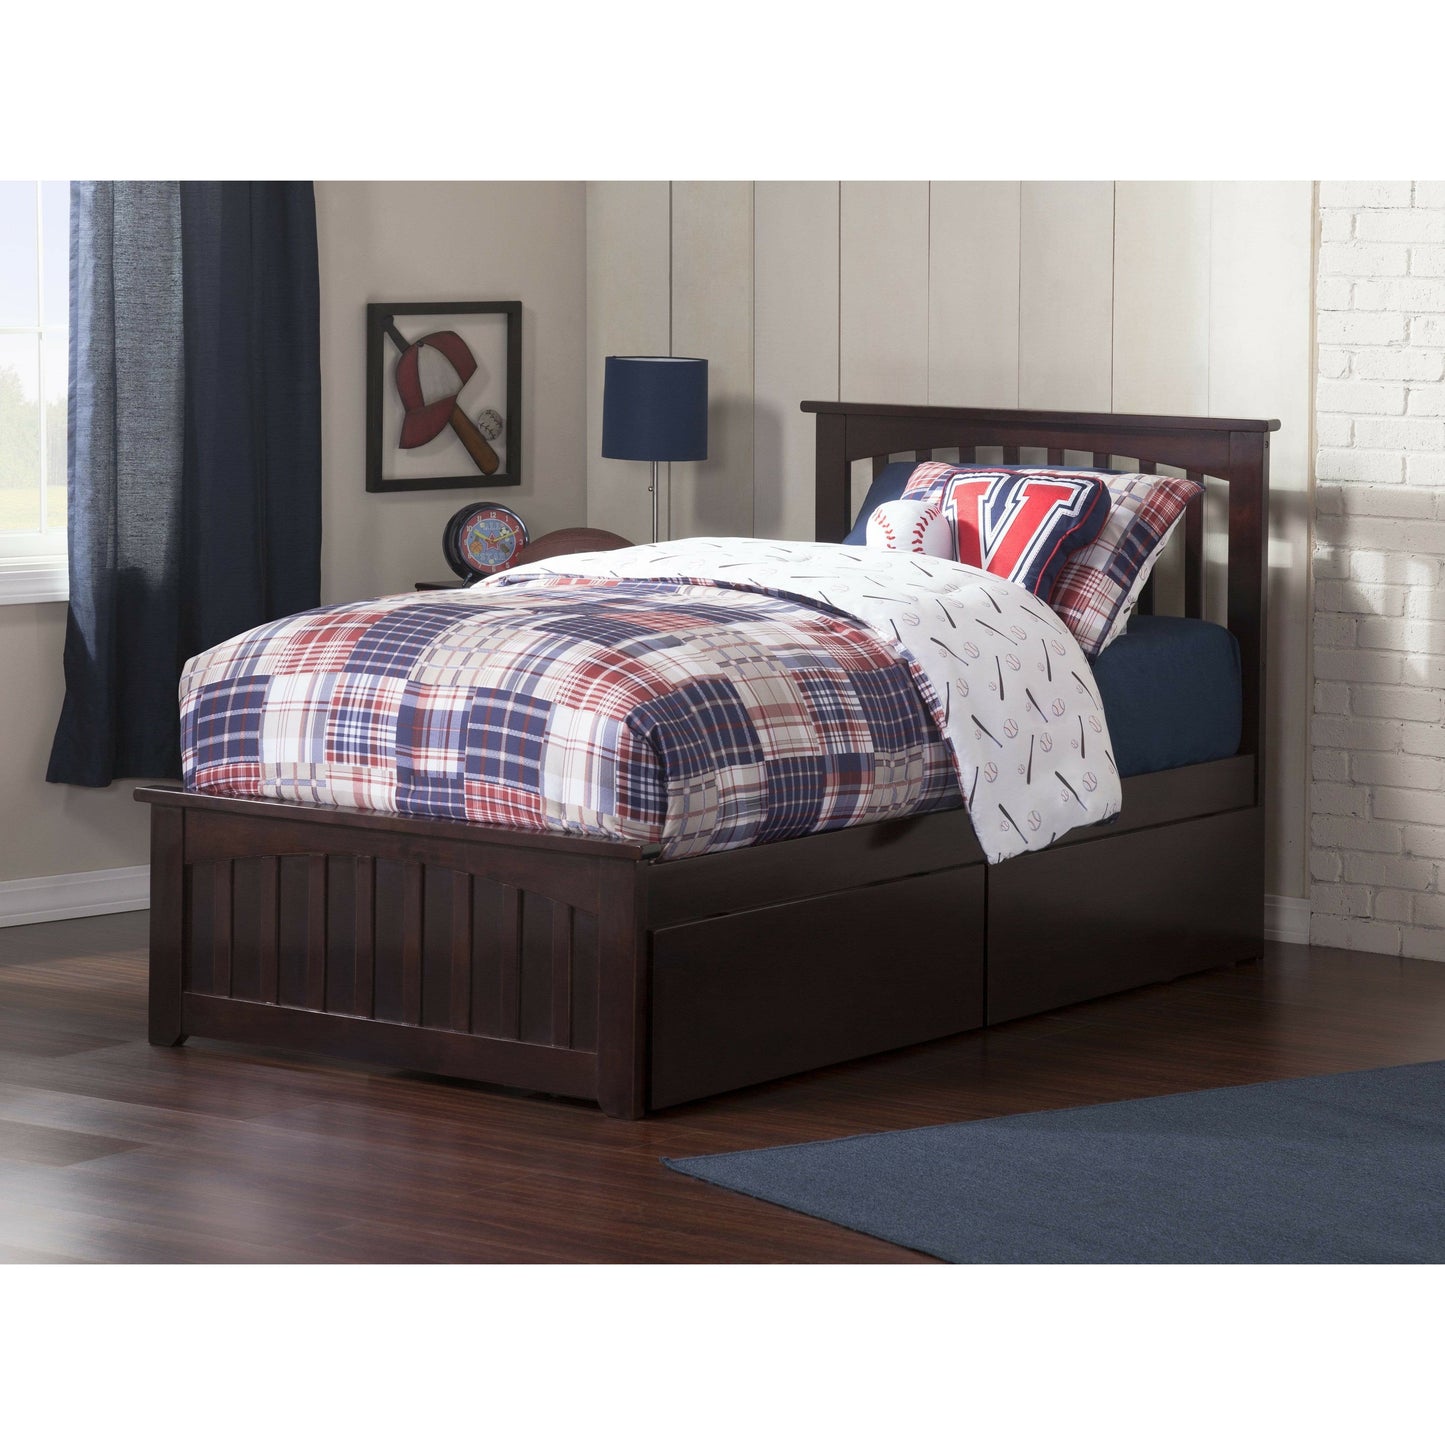 Atlantic Furniture Bed Mission Twin Platform Bed with Matching Foot Board with 2 Urban Bed Drawers in Espresso